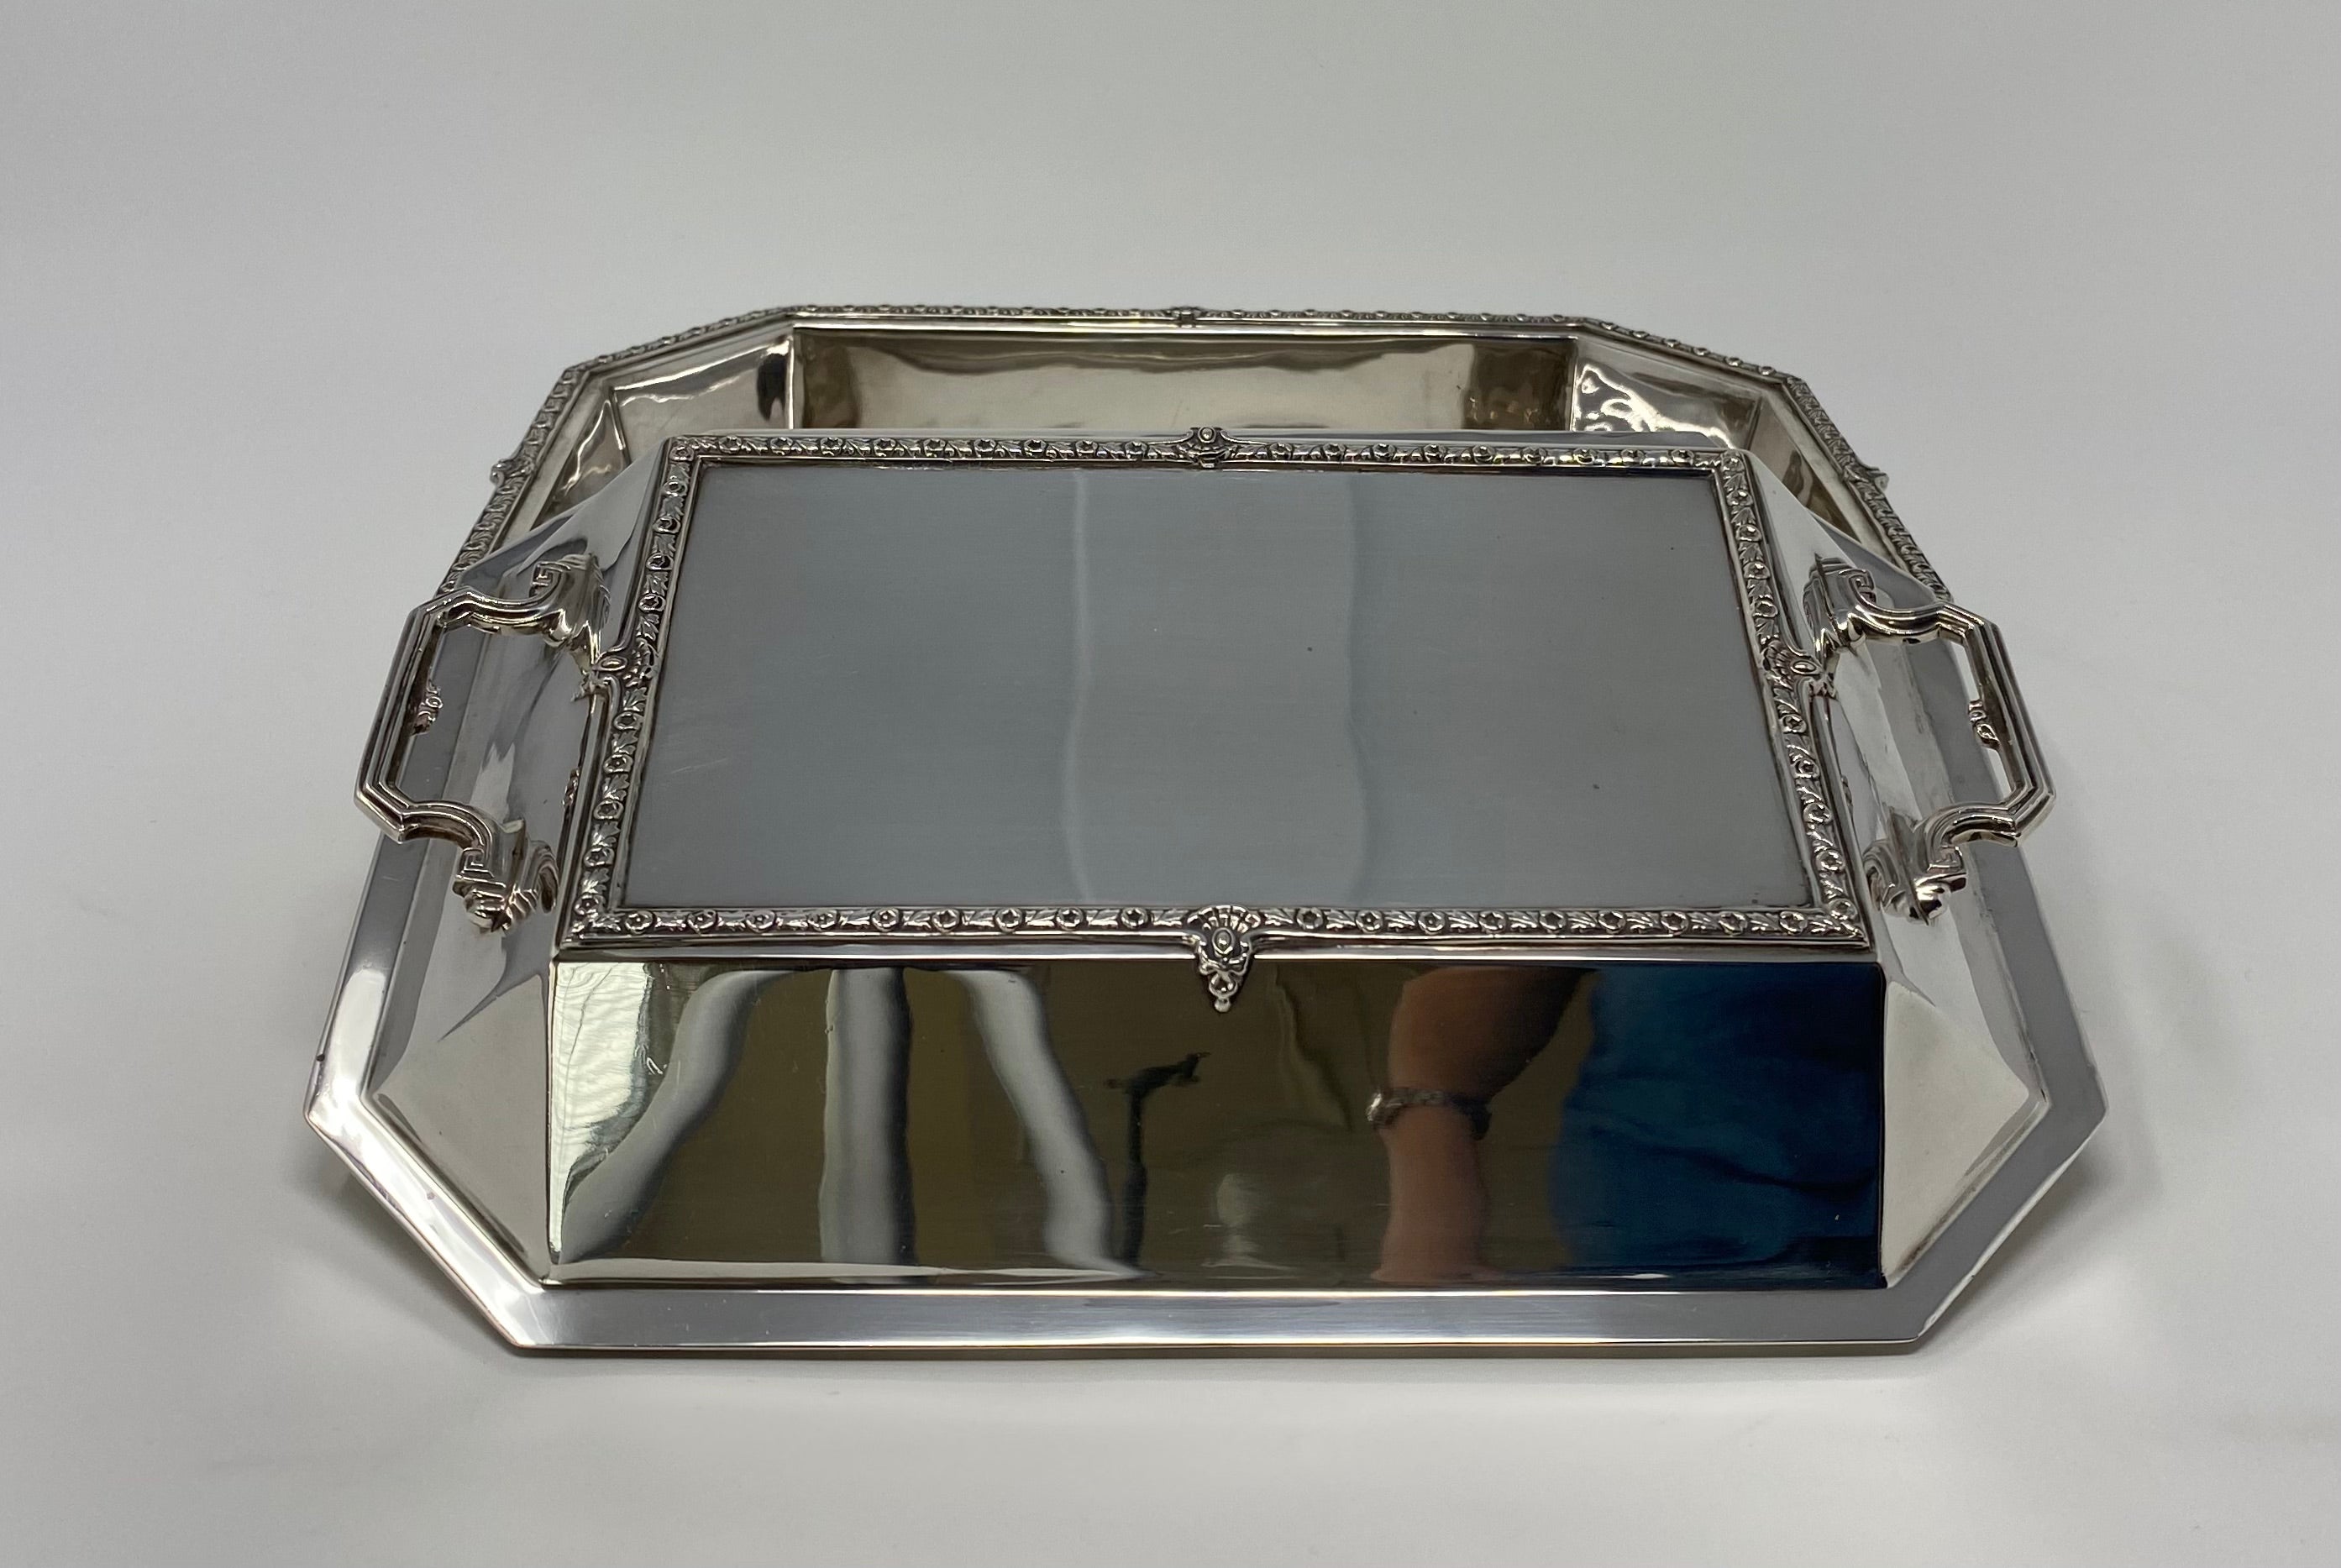 Silver Art Deco Serving Dish and Cover with Side Handles